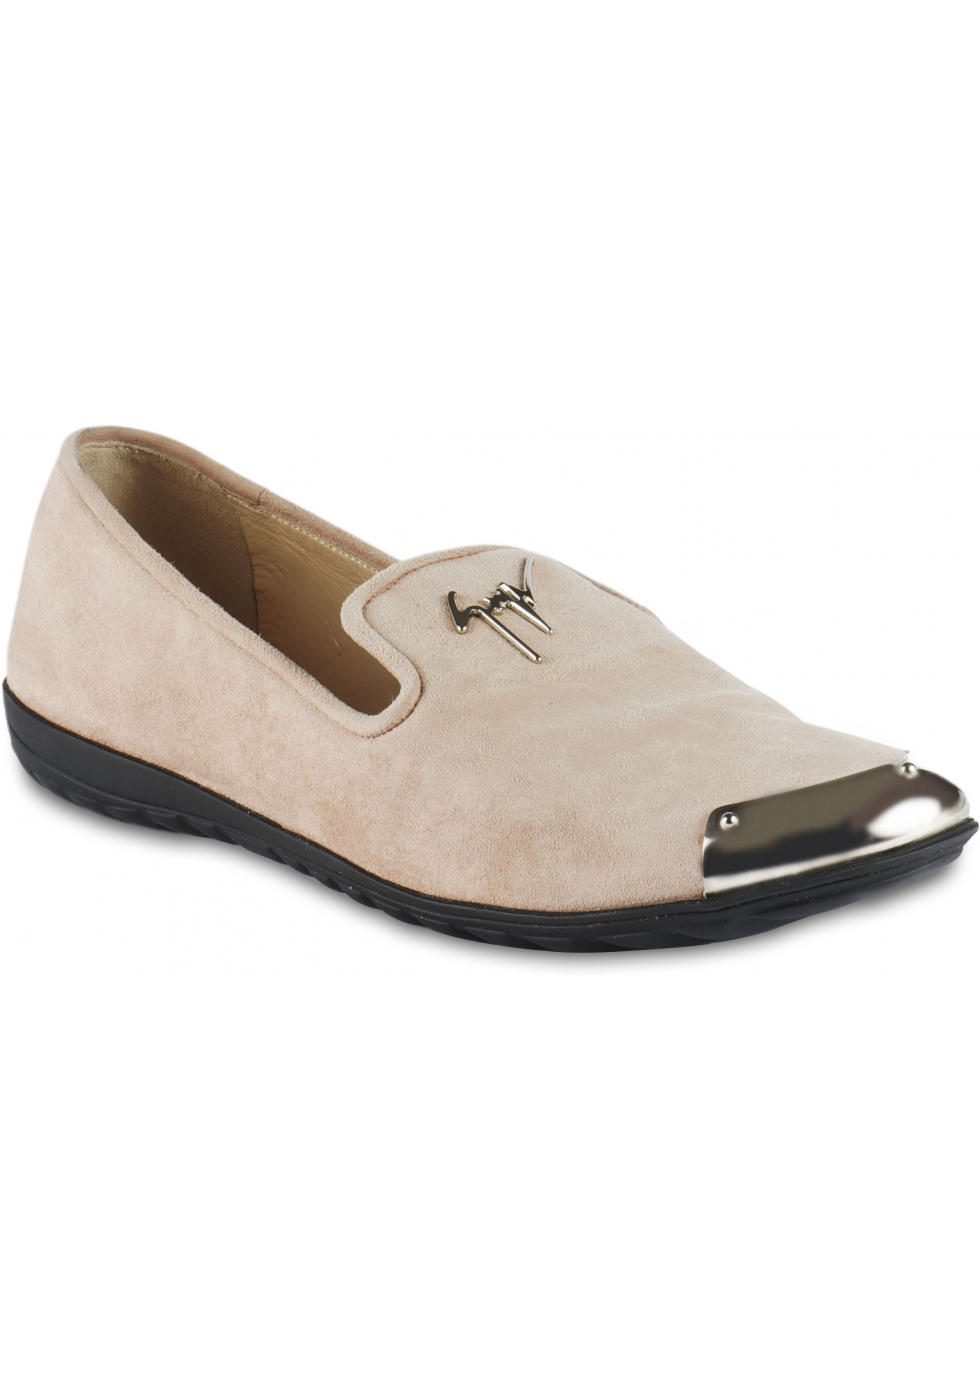 Giuseppe Zanotti Women's slip-on loafers shoes in nude suede leather with cap toe - Italian Boutique